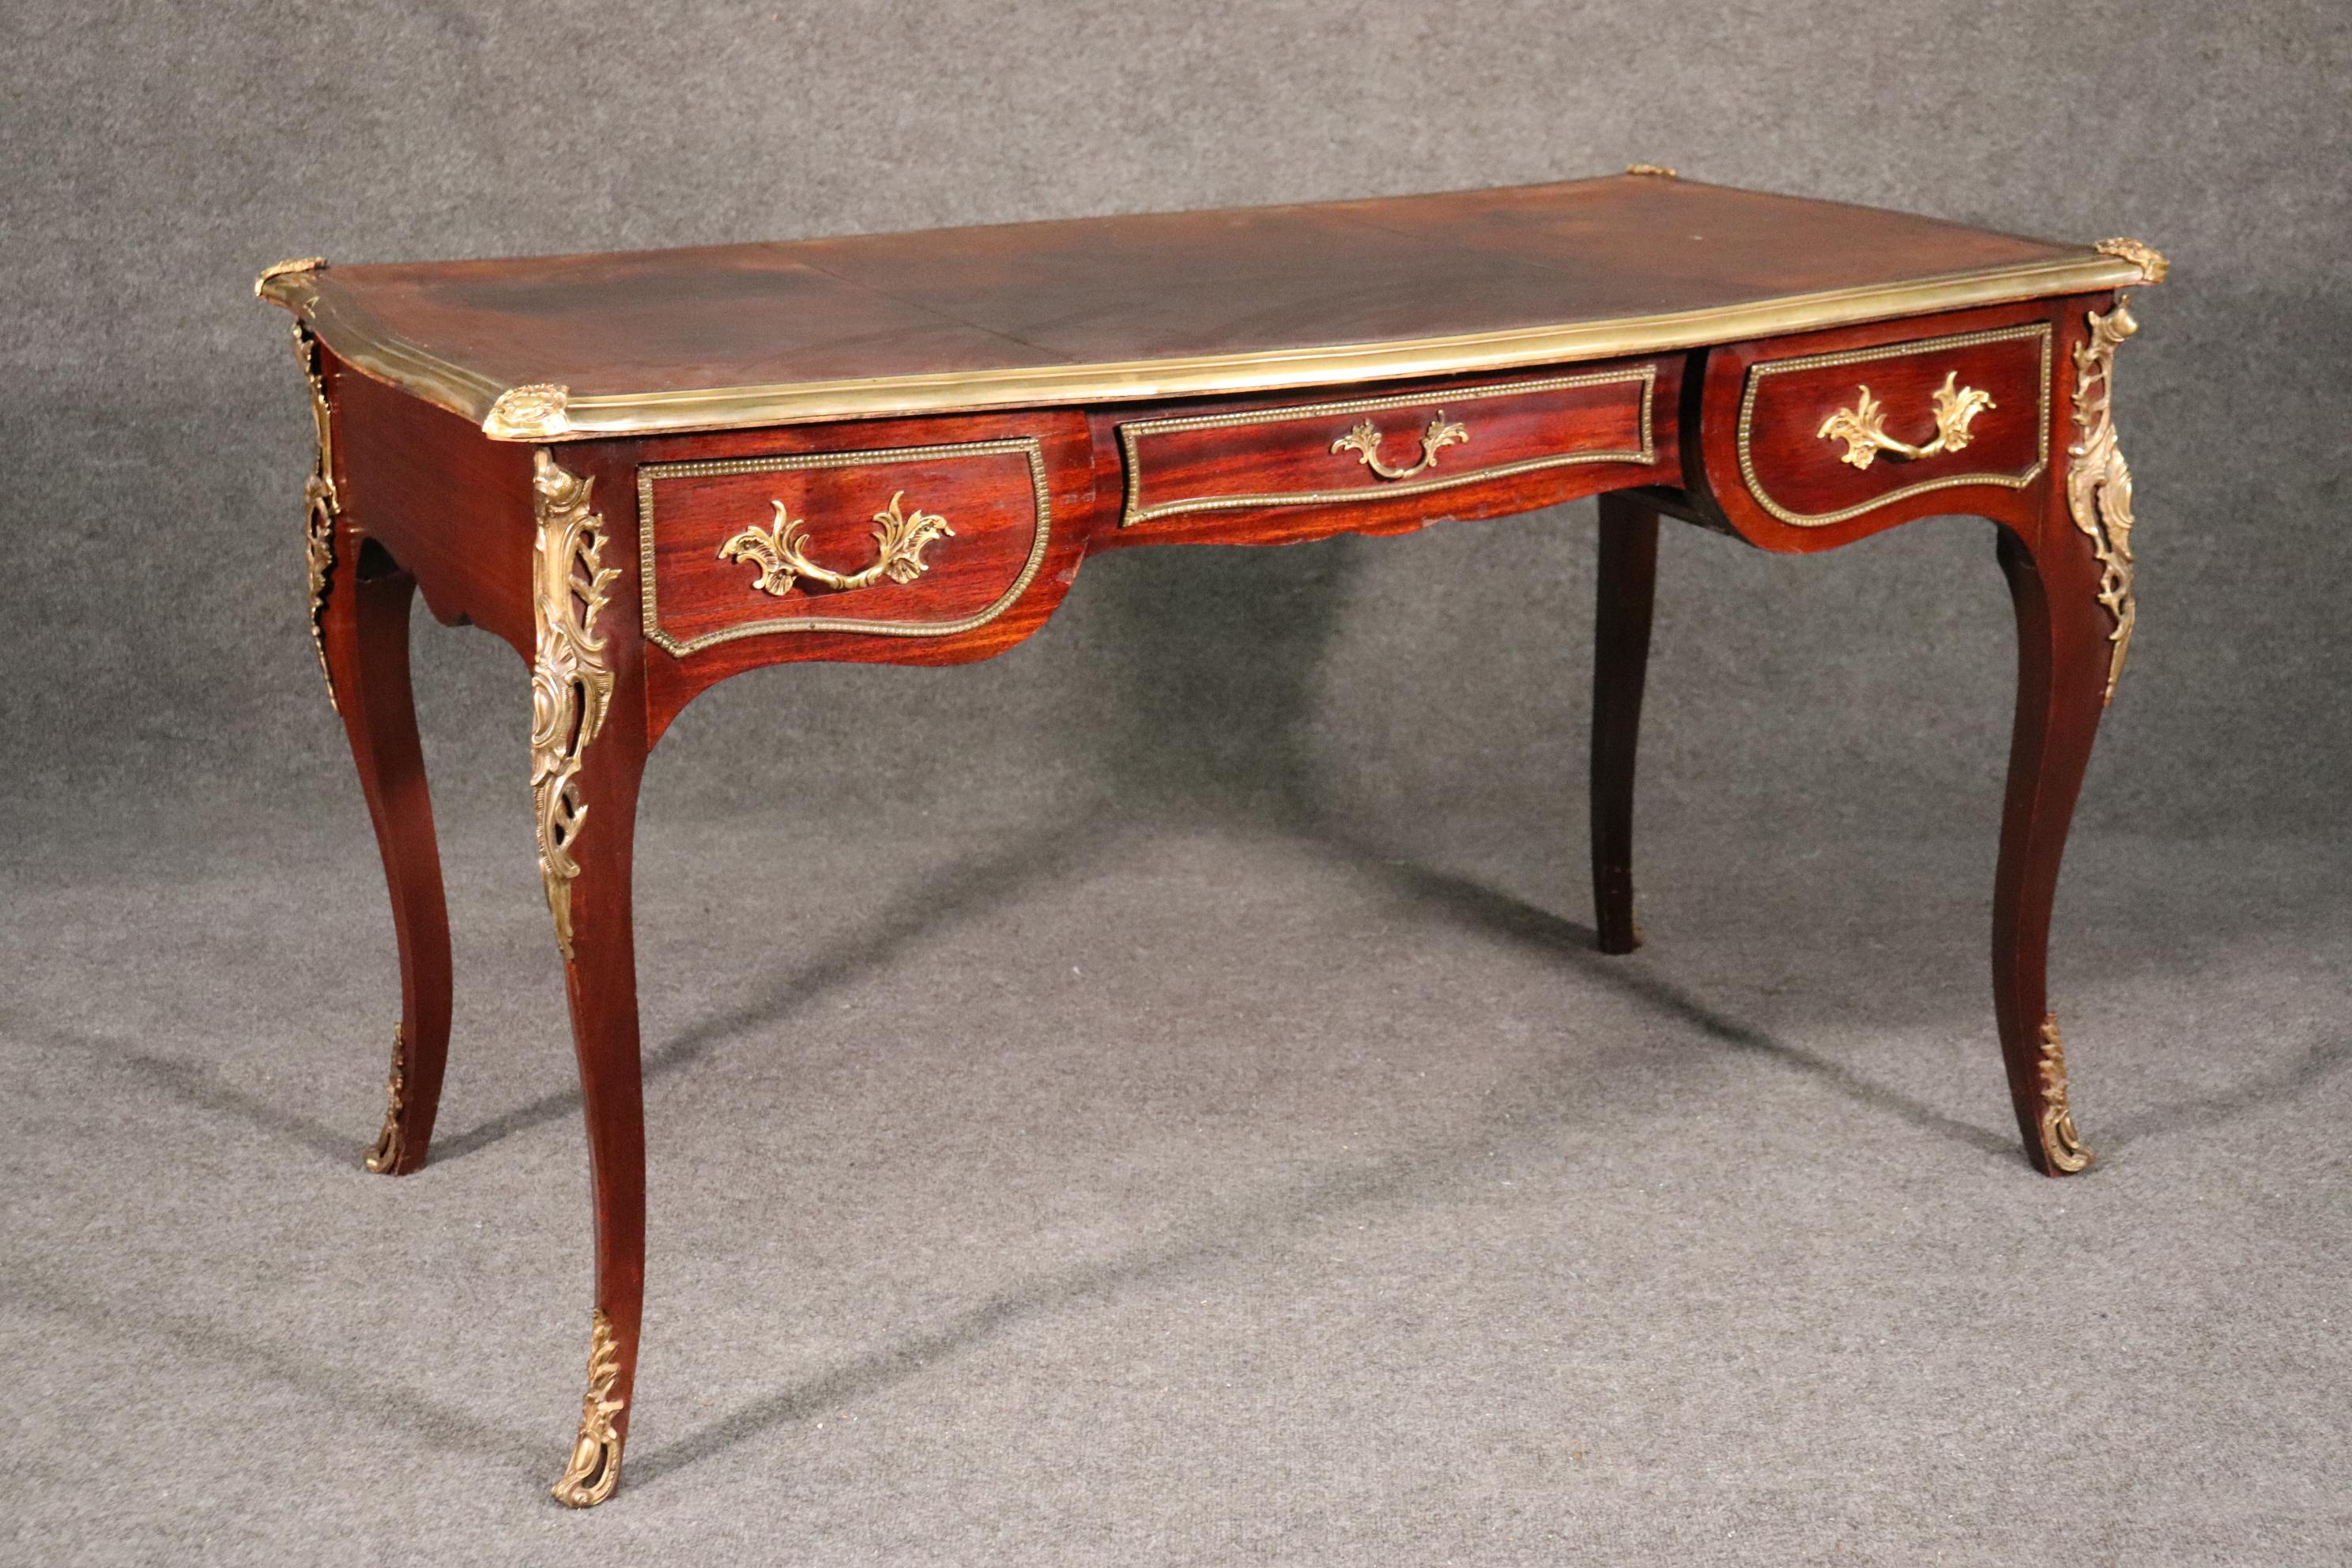 This is a beautifully made French bureau plat with tons of character and time-worn charm. The leather top does have stains from years of use and this really must be accepted or it’s not the right desk for you. If it is the right desk, then you will